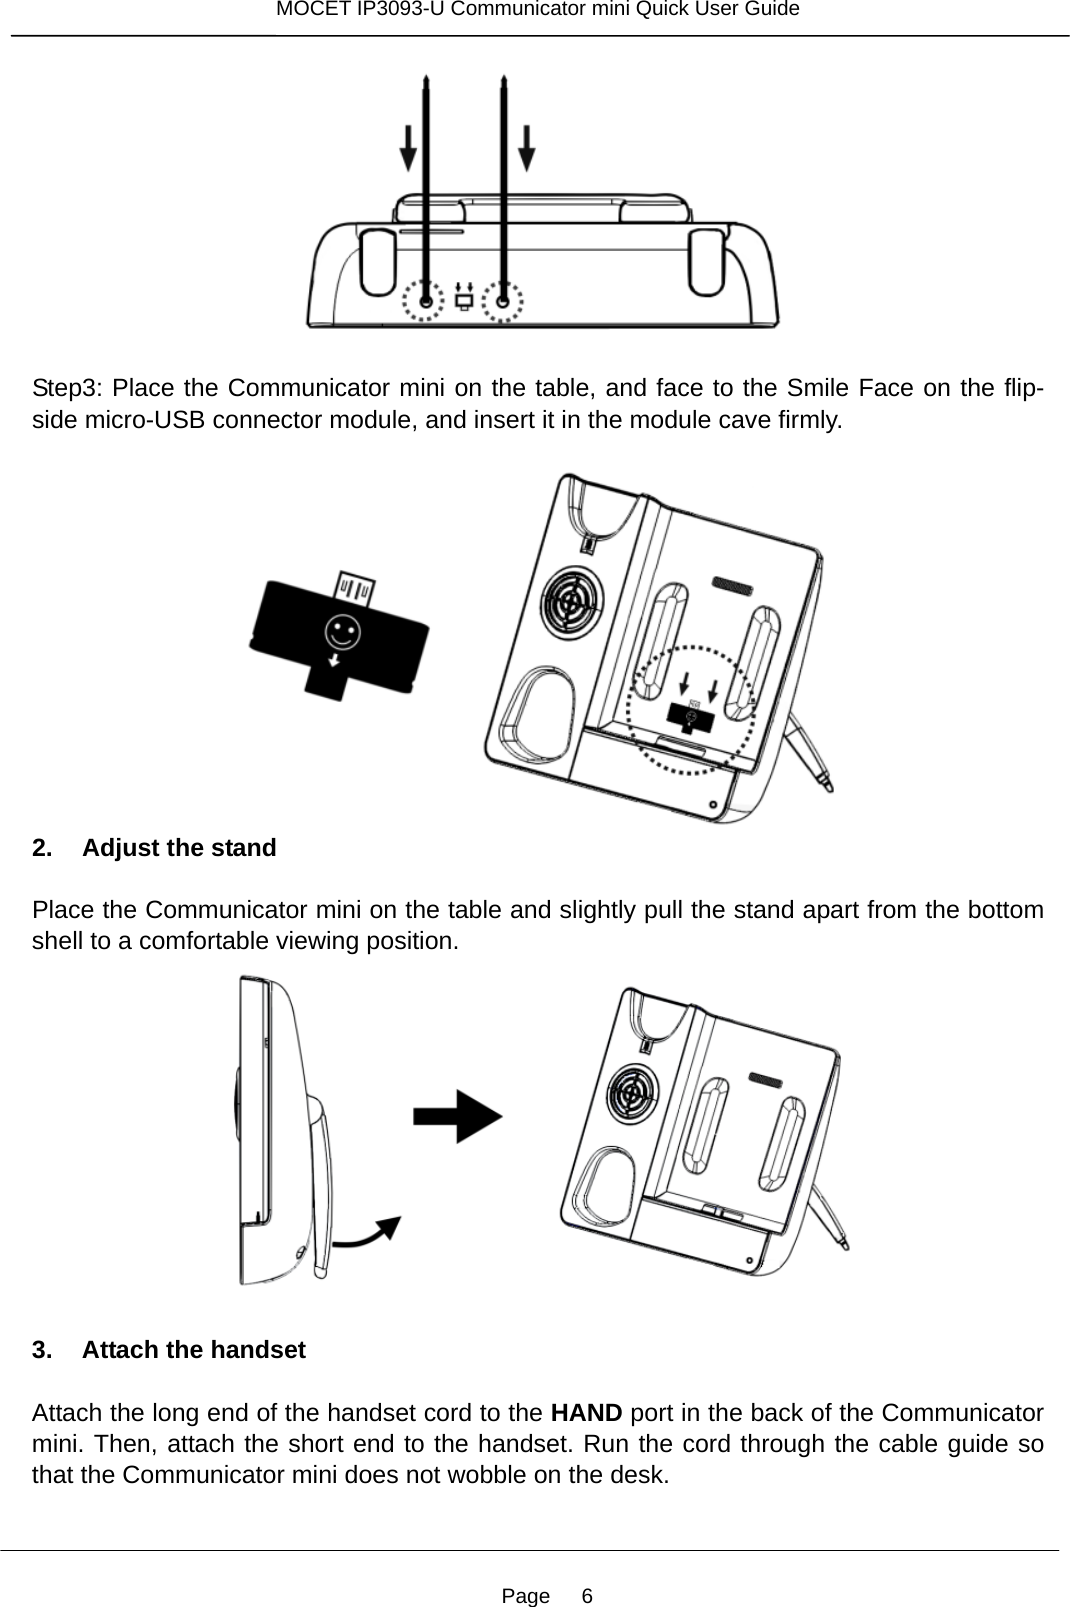 Page   6 MOCET IP3093-U Communicator mini Quick User Guide    Step3: Place the Communicator mini on the table, and face to the Smile Face on the flip-side micro-USB connector module, and insert it in the module cave firmly.   2. Adjust the stand  Place the Communicator mini on the table and slightly pull the stand apart from the bottom shell to a comfortable viewing position.       3. Attach the handset  Attach the long end of the handset cord to the HAND port in the back of the Communicator mini. Then, attach the short end to the handset. Run the cord through the cable guide so that the Communicator mini does not wobble on the desk.  